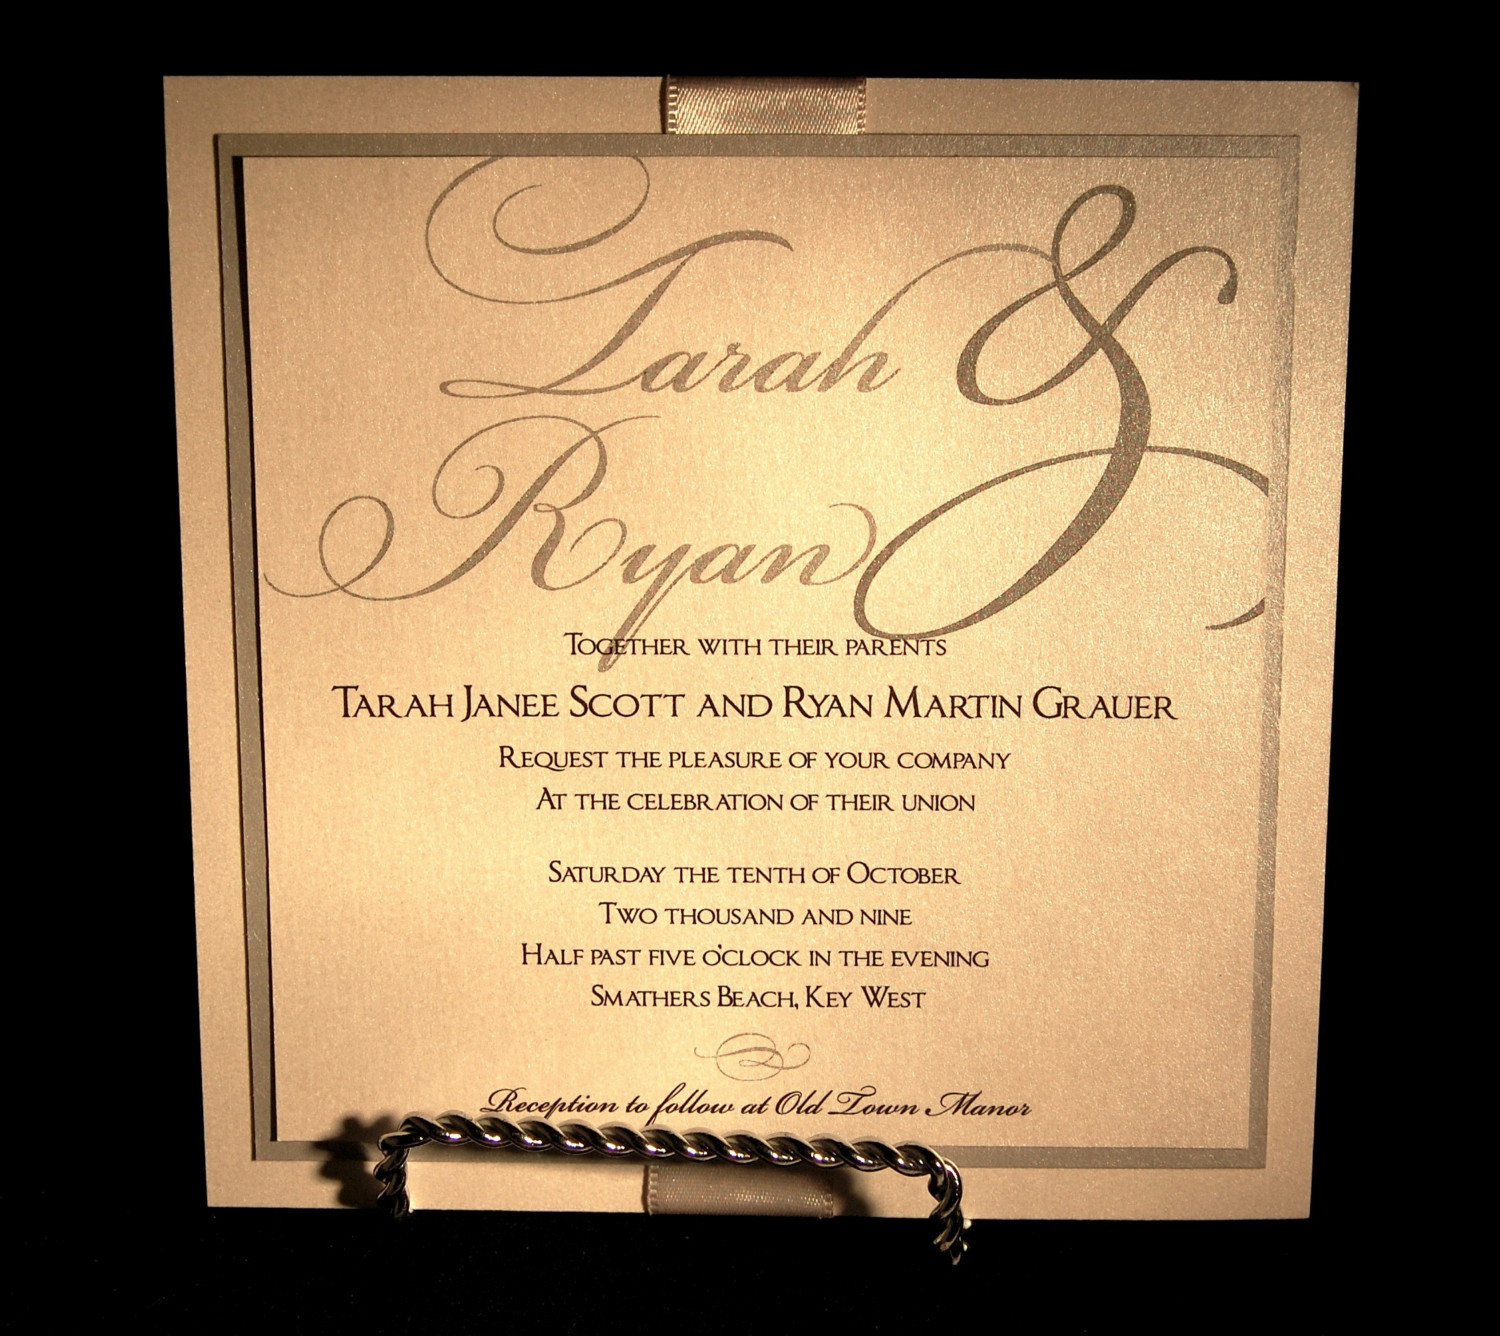 Quotes For Wedding Invitations
 Famous Quotes For Wedding Invitations QuotesGram